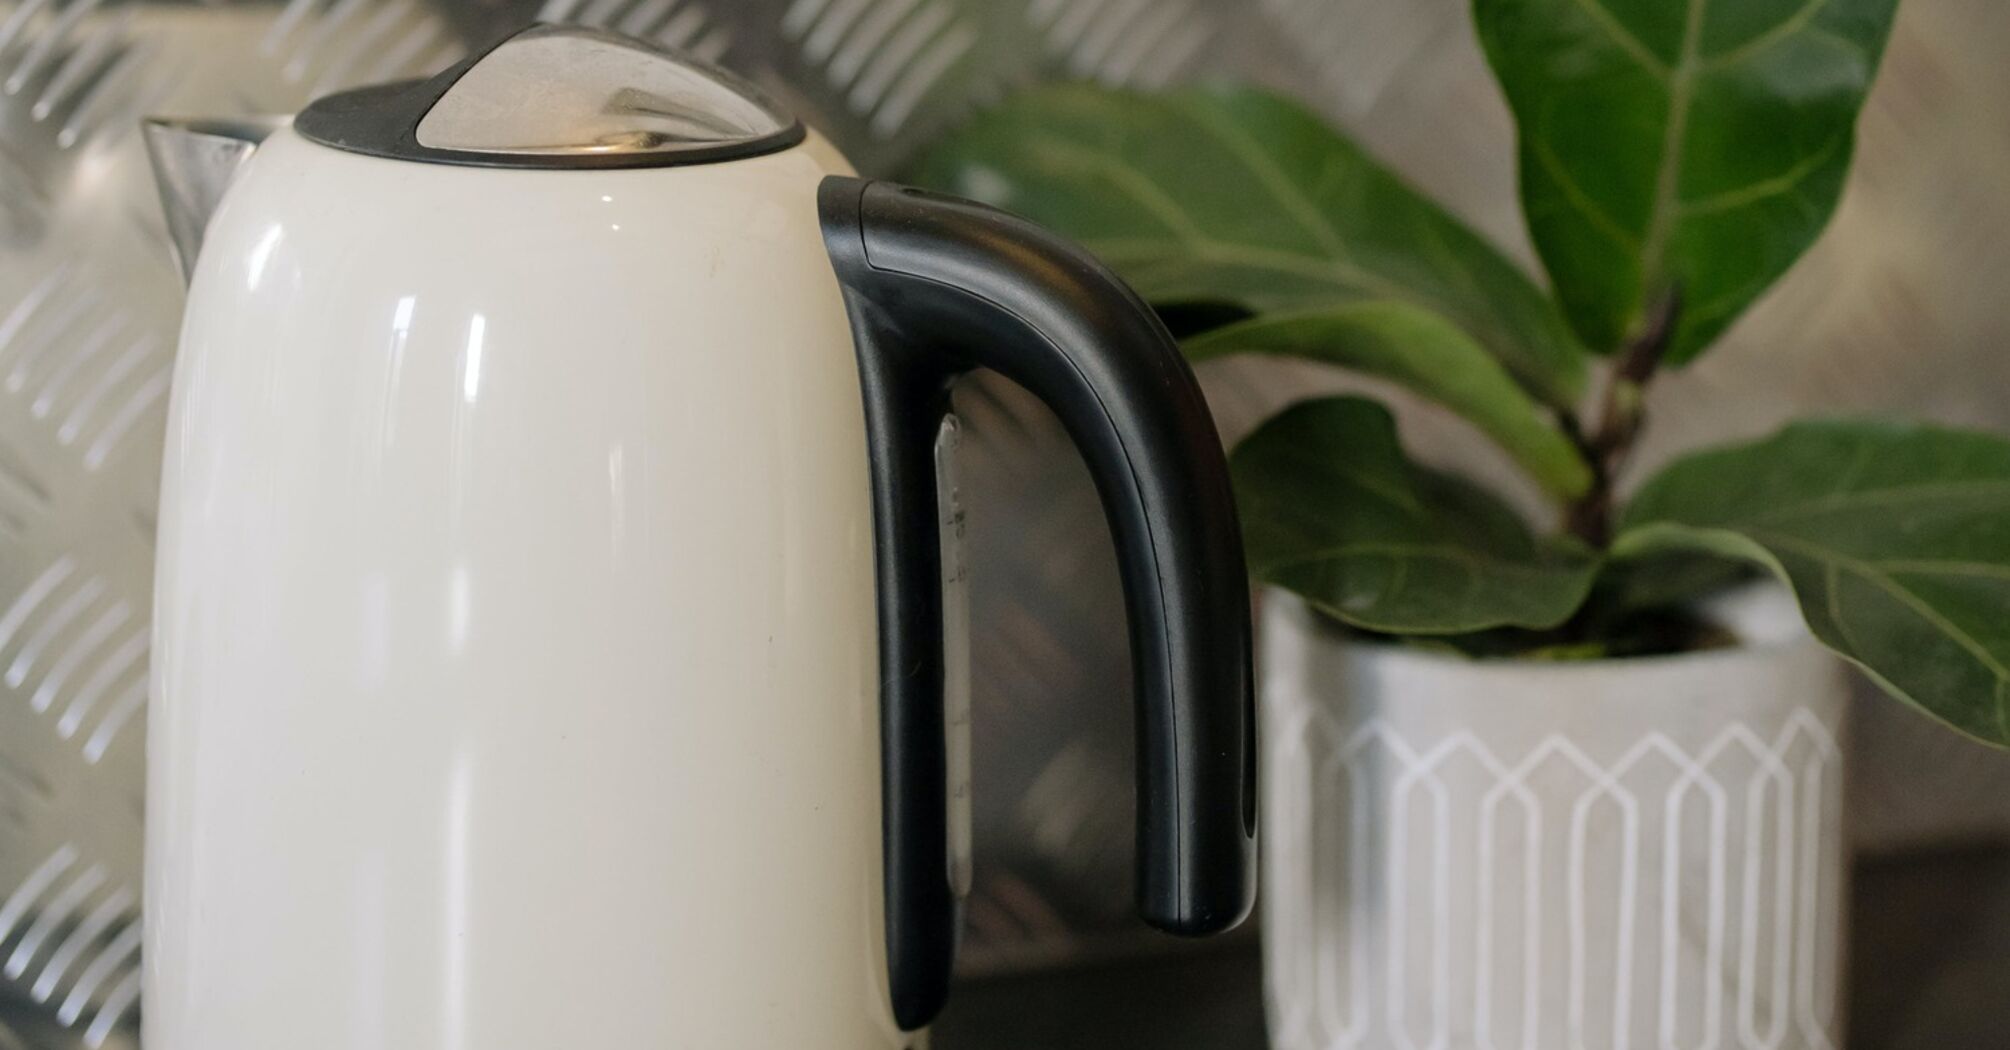 3 harmful habits that can ruin your electric kettle